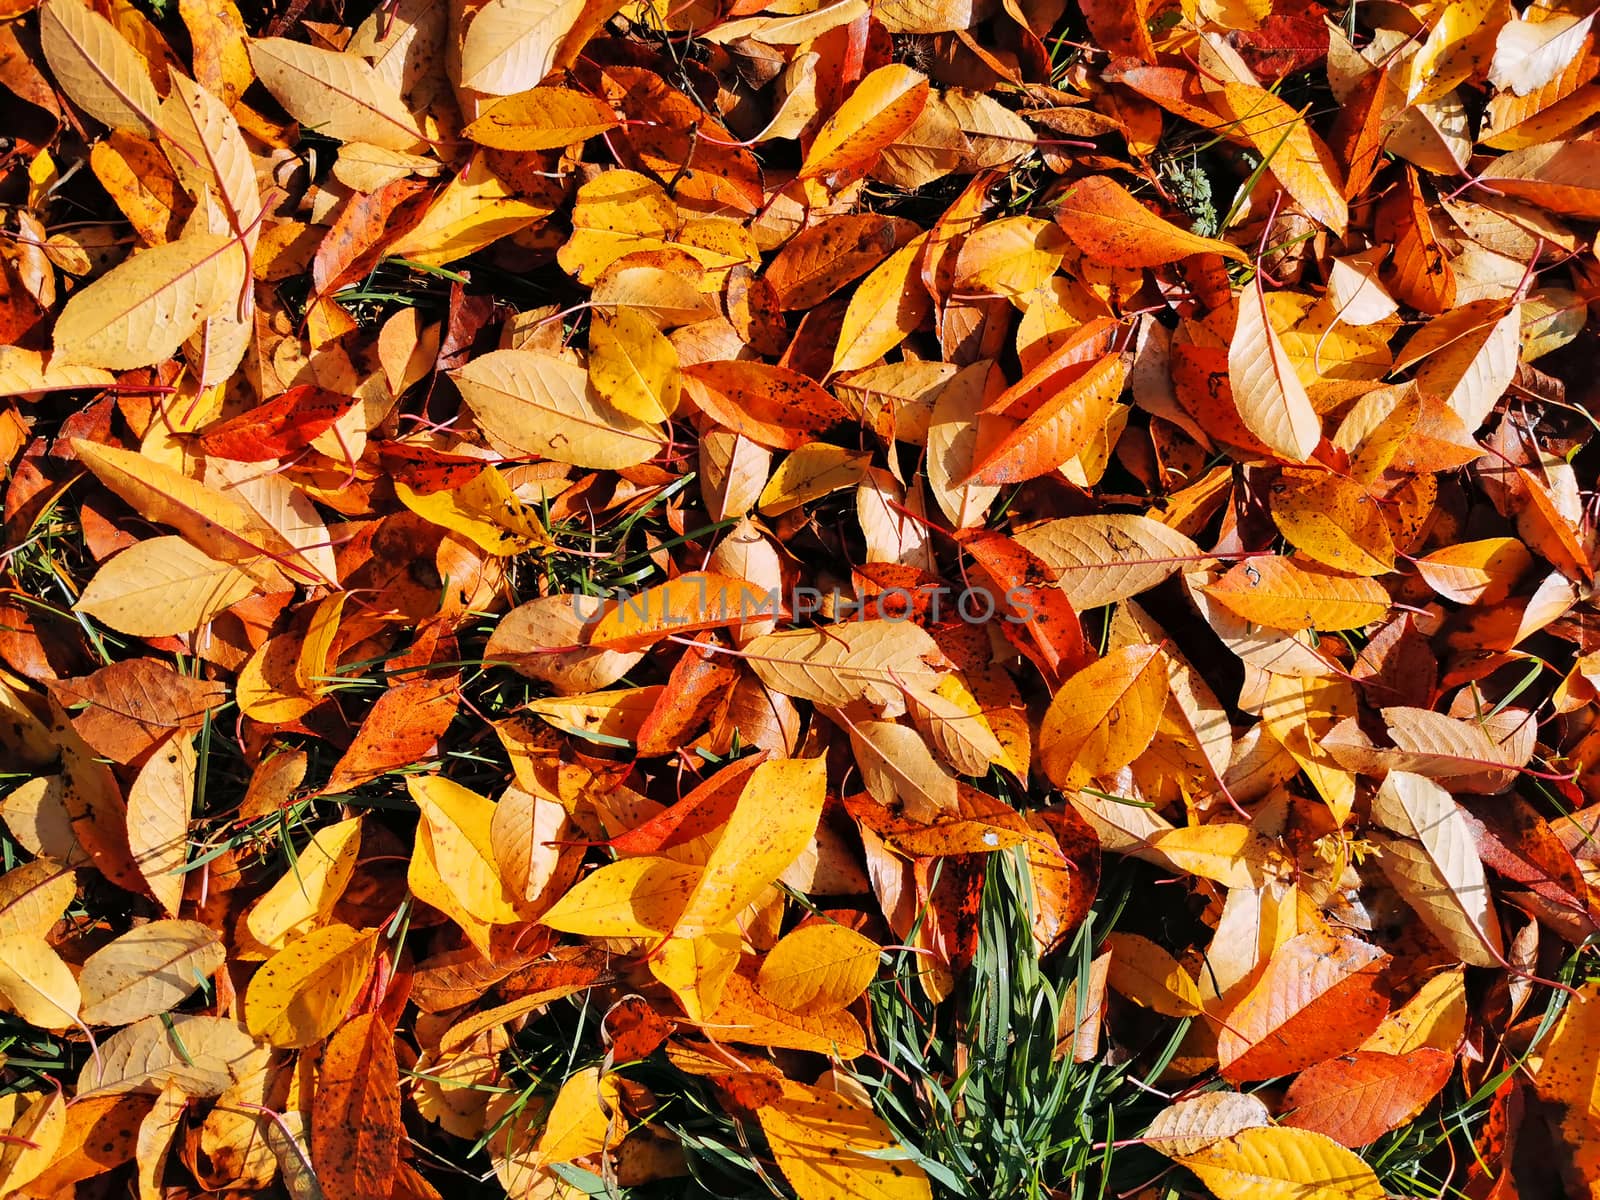 Close image of fallen autumn leaves by savcoco